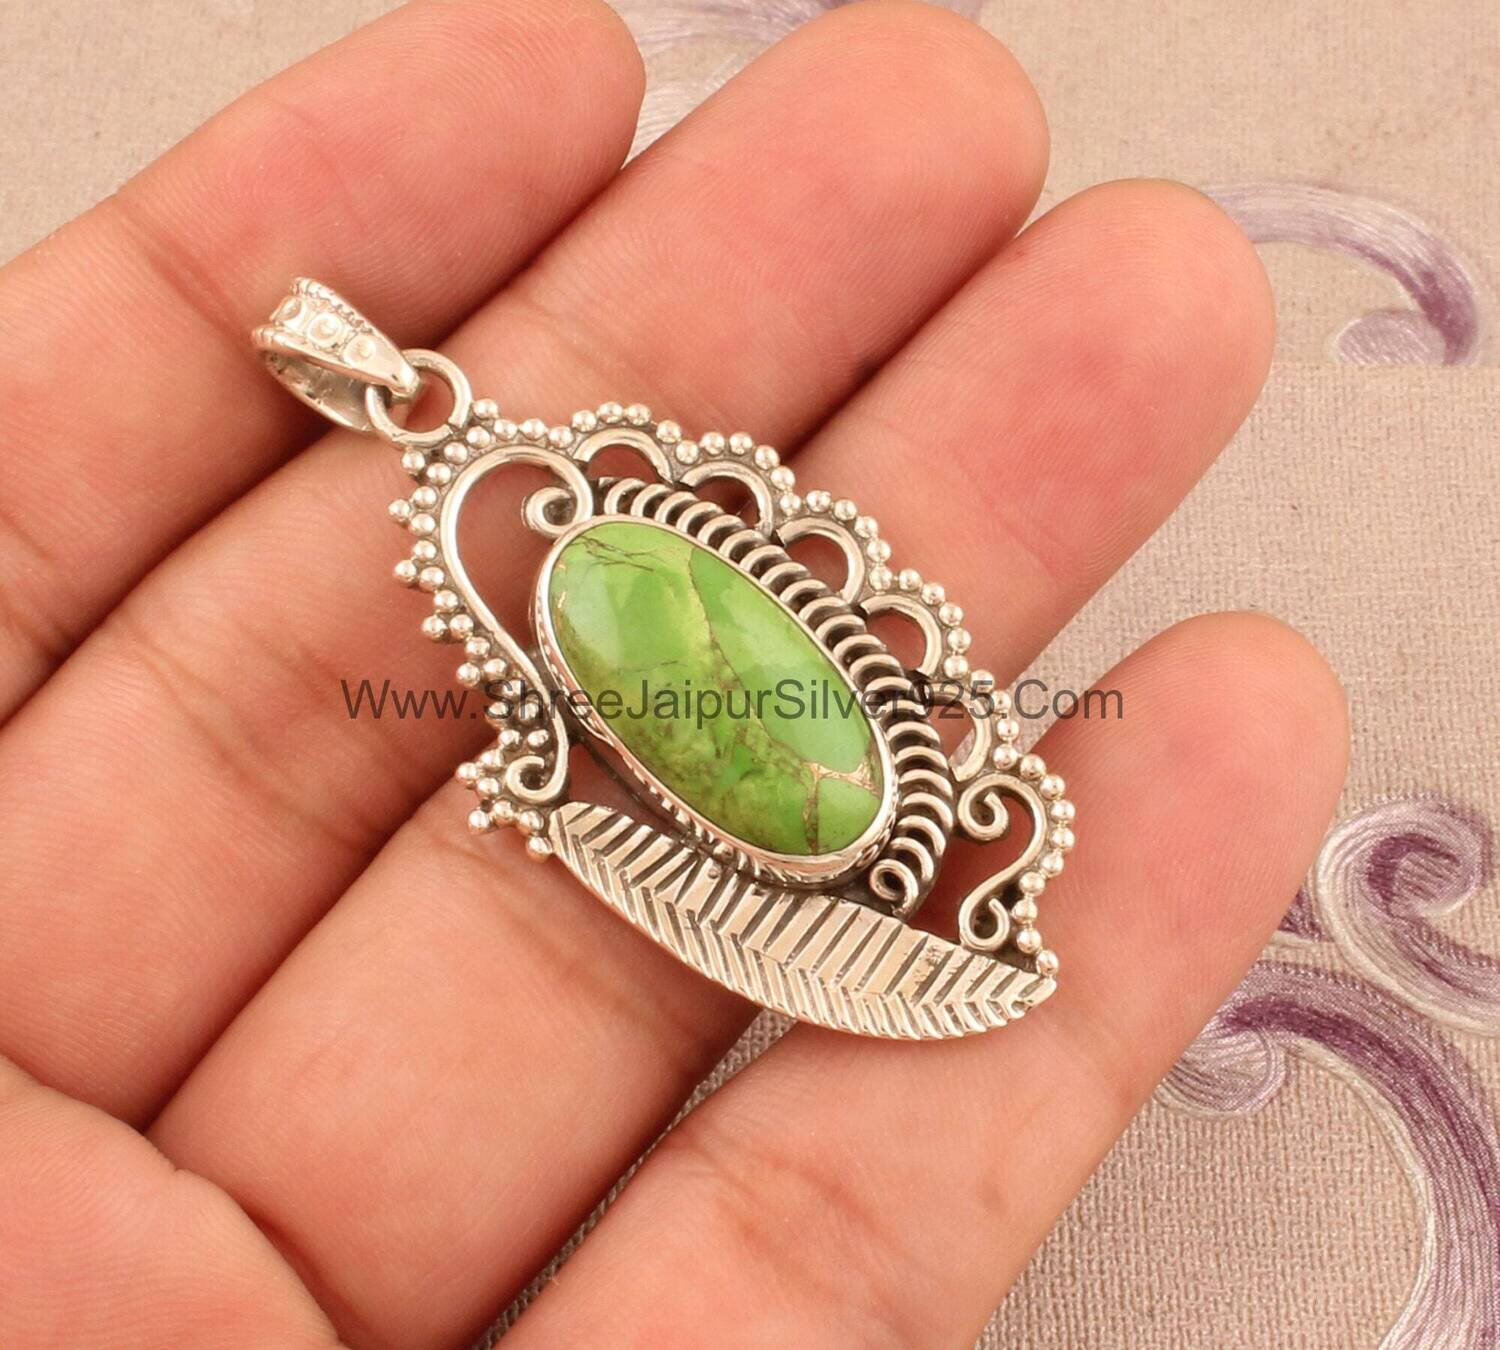 Green Copper Turquoise Solid 925 Sterling Silver Necklace Pendant For Women Handmade Engraved Leaf Pendant For Wedding Anniversary Gift Idea